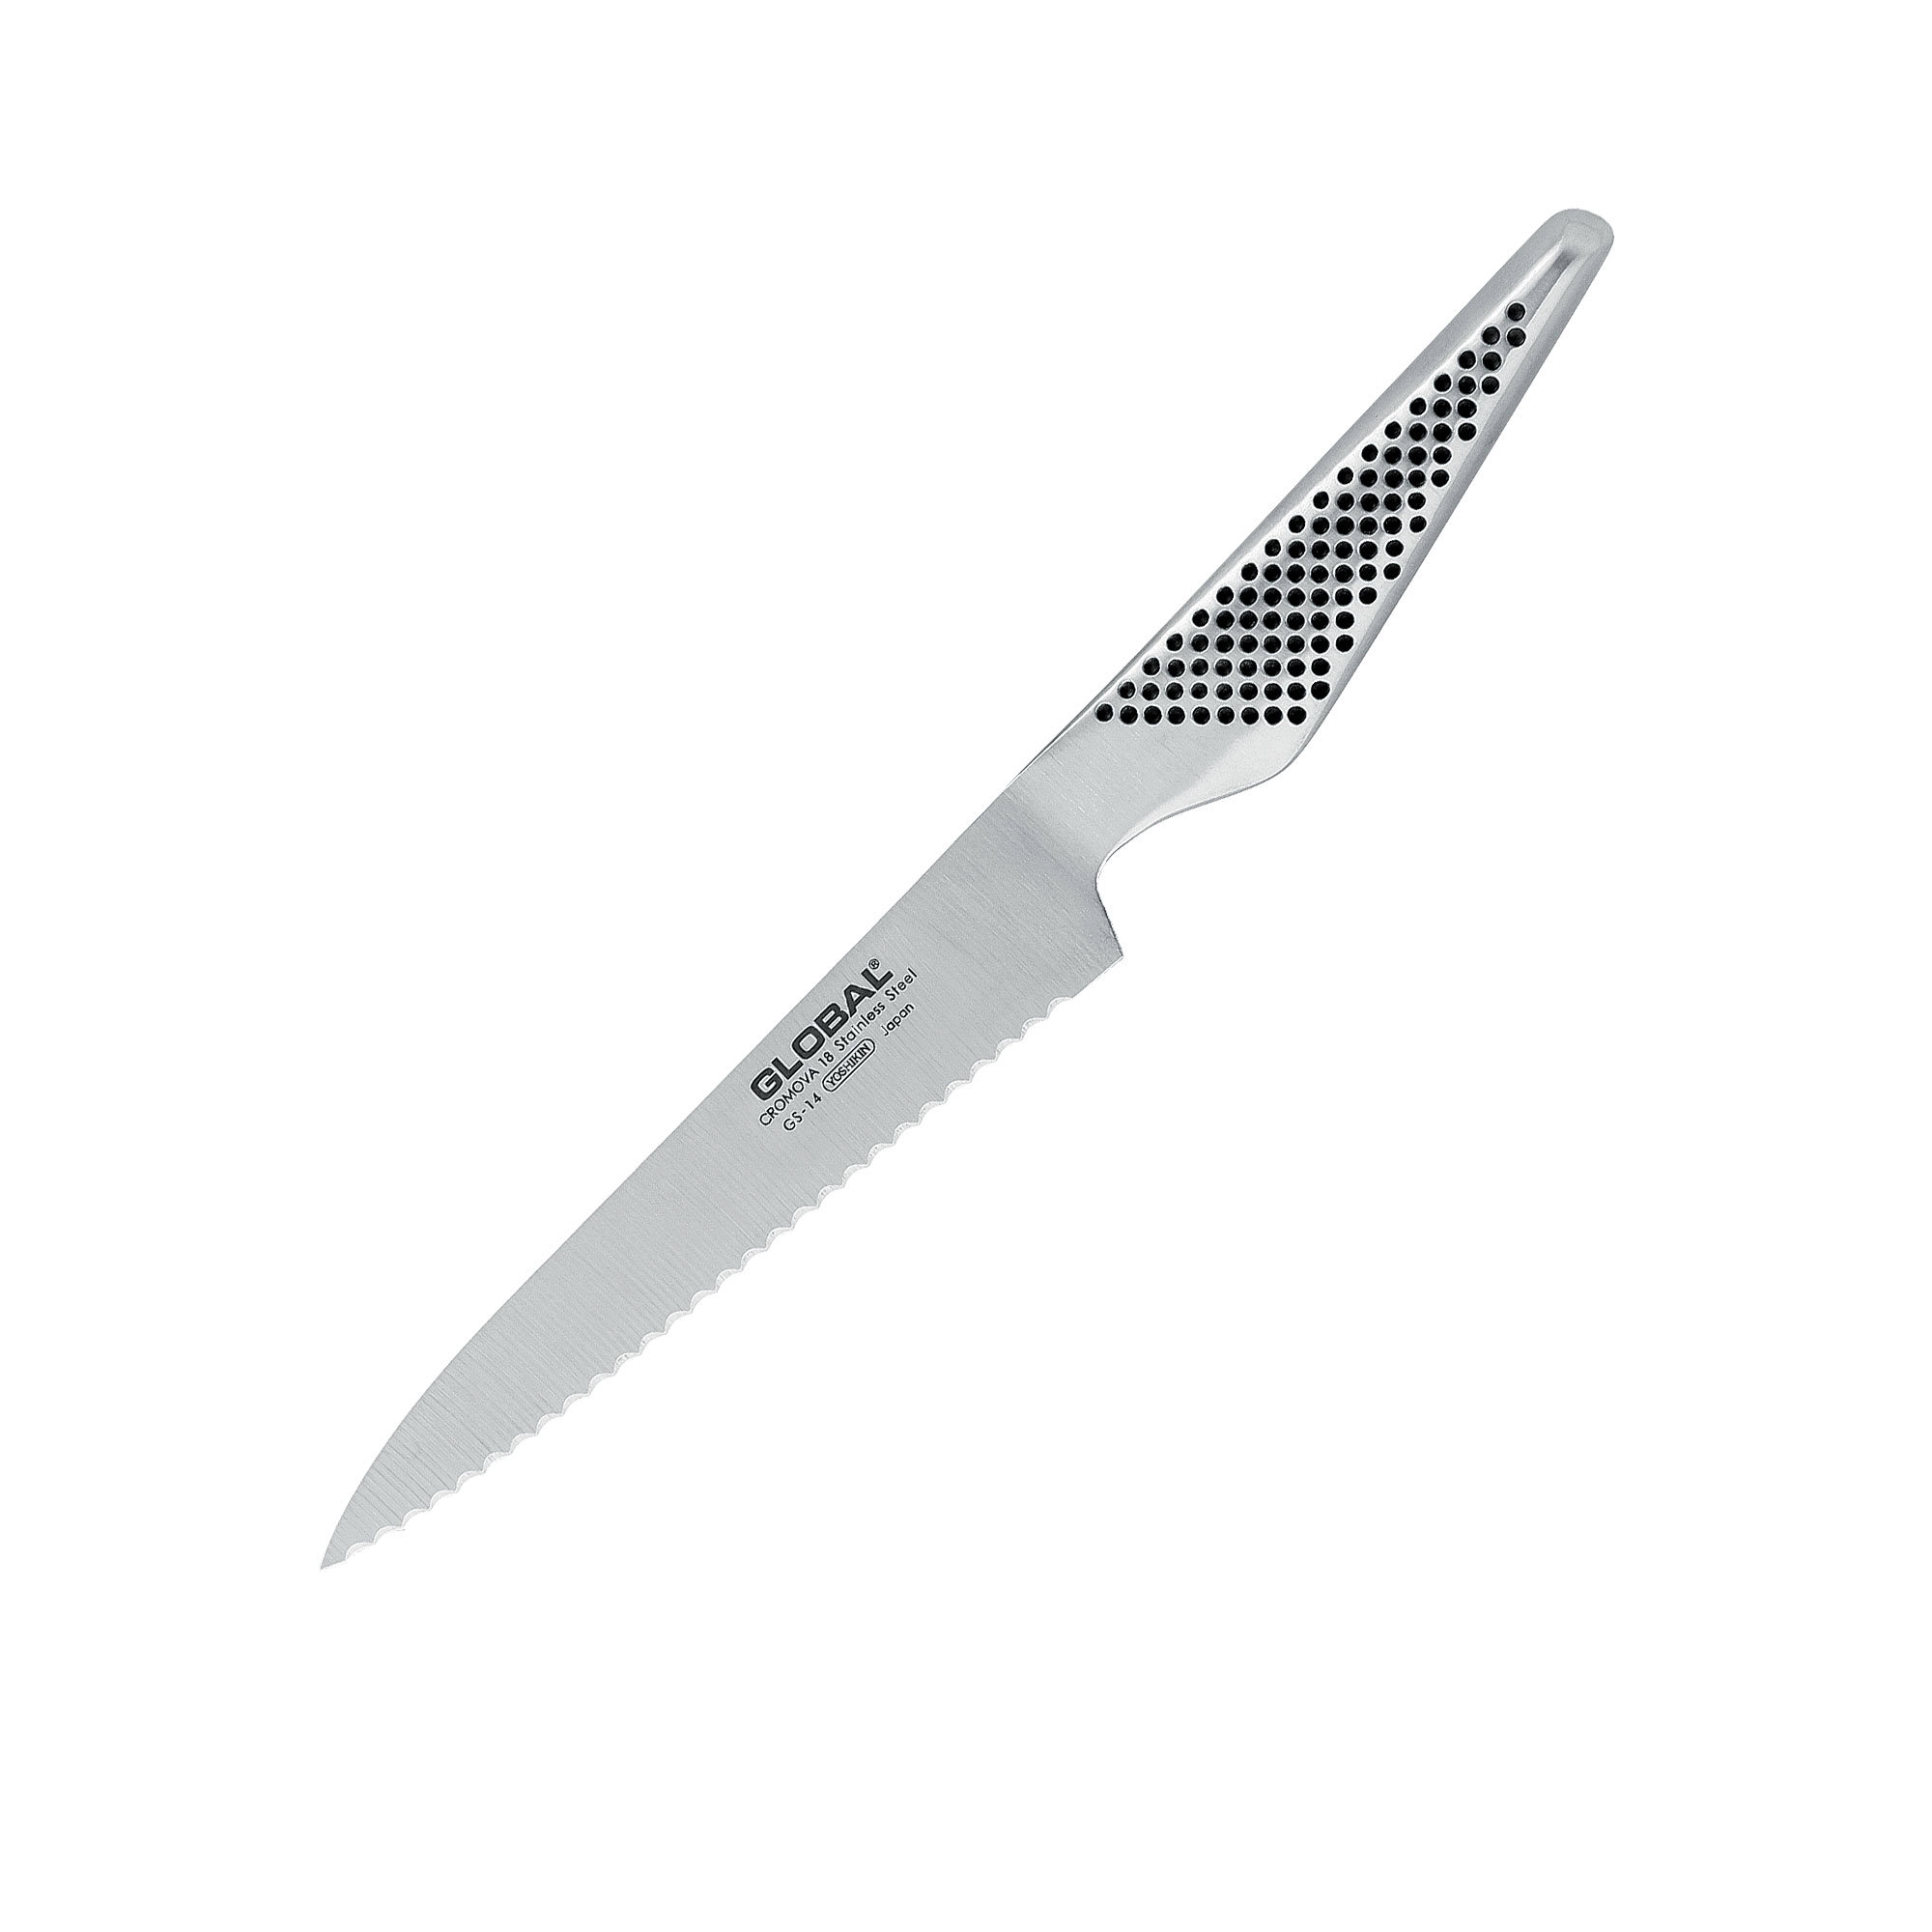 Global GS-14 Utility Knife Scalloped 15cm Image 1